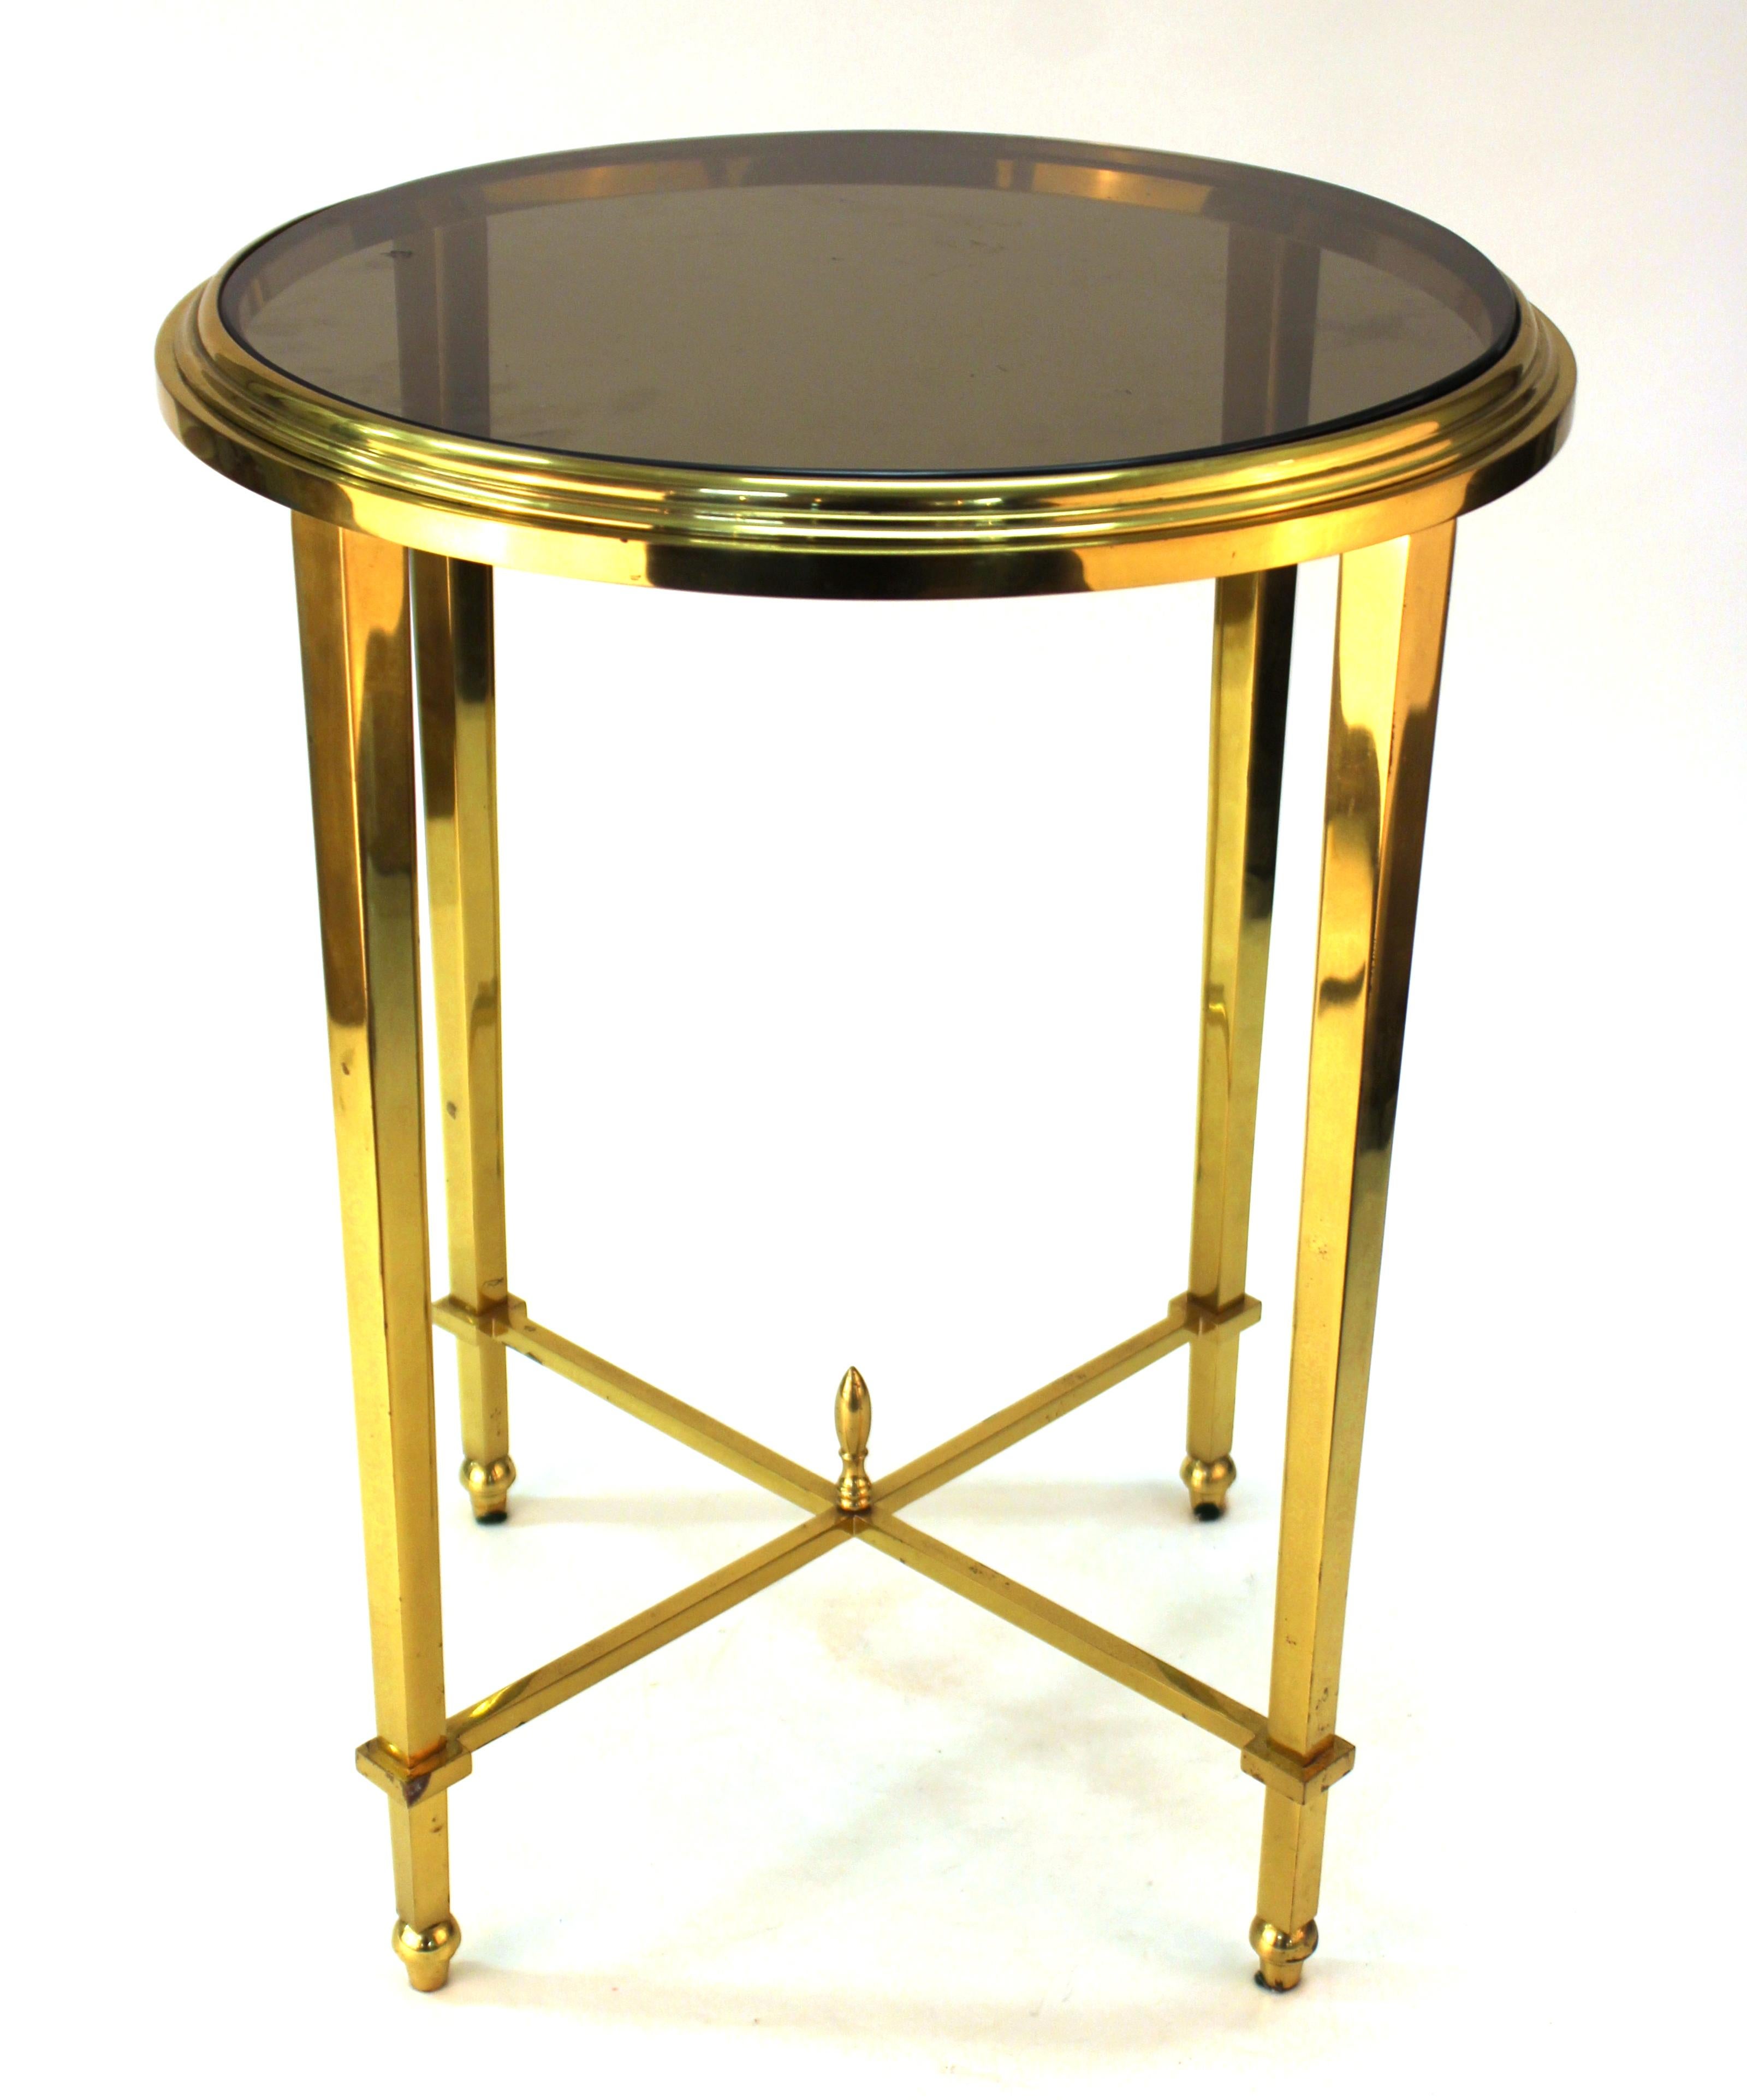 Modern classical style side table or end table in a metal round frame with a smoked glass top. The piece is in good vintage condition with some wear and patina to the legs.